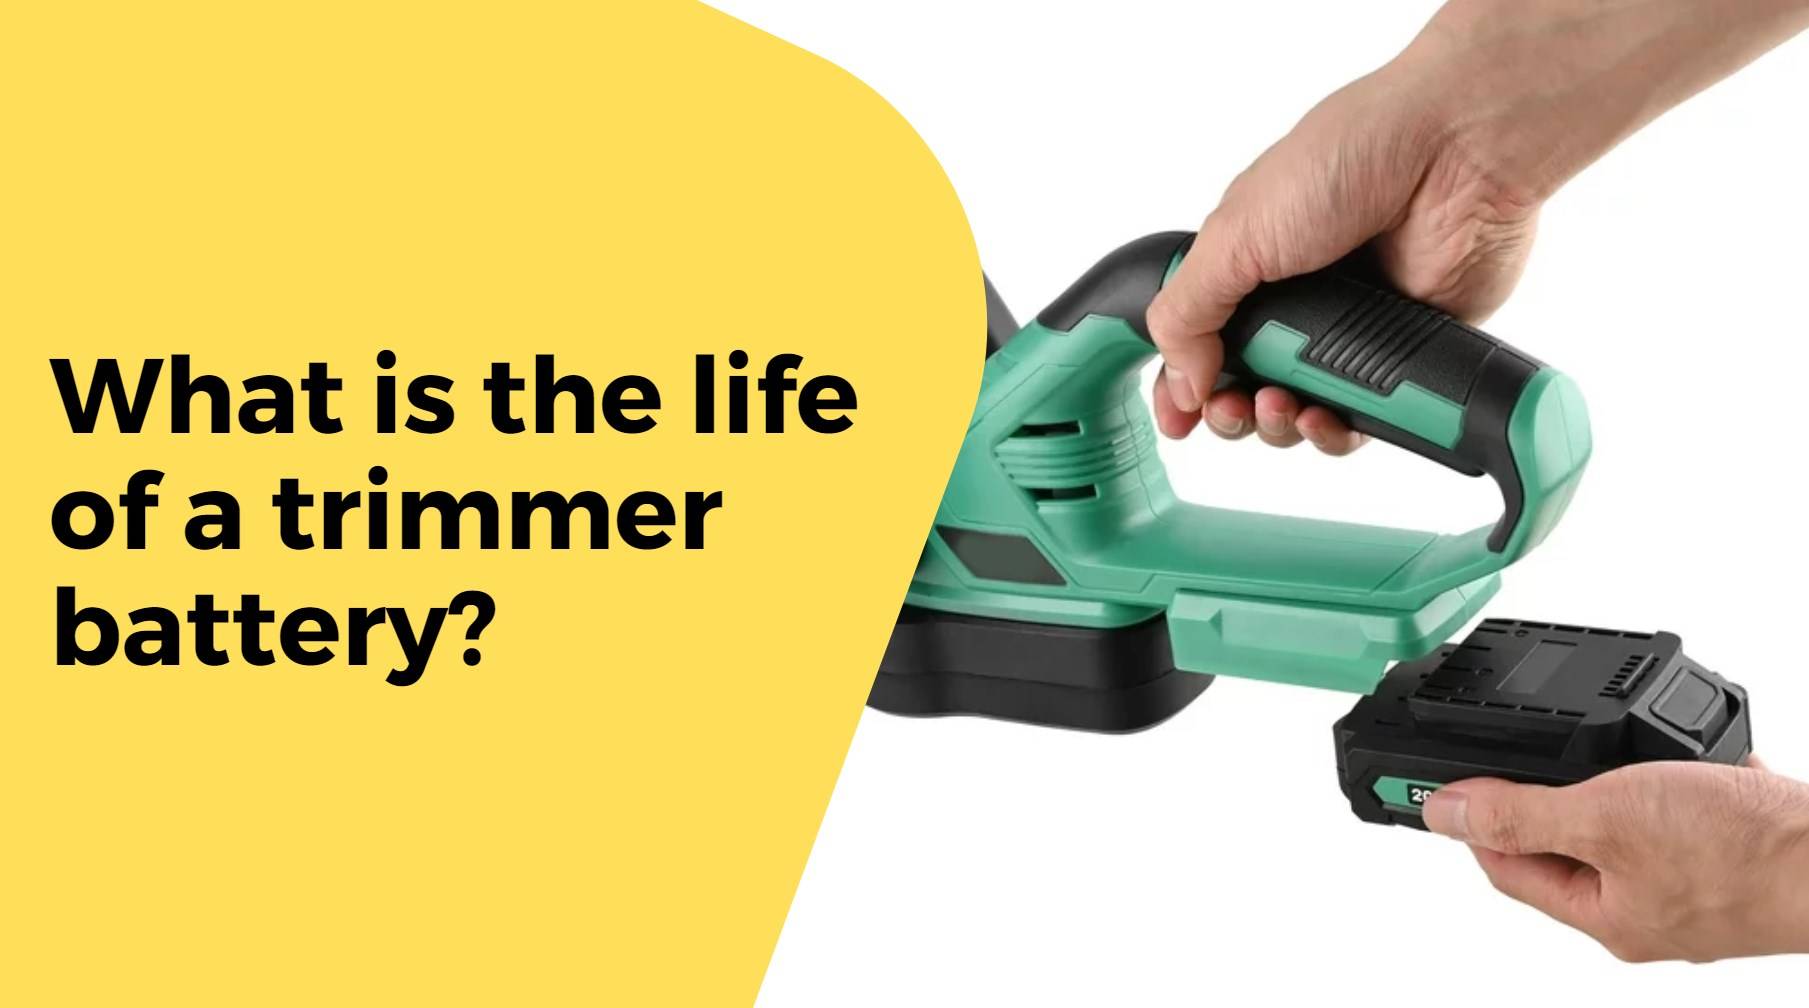 What is the life of a trimmer battery?